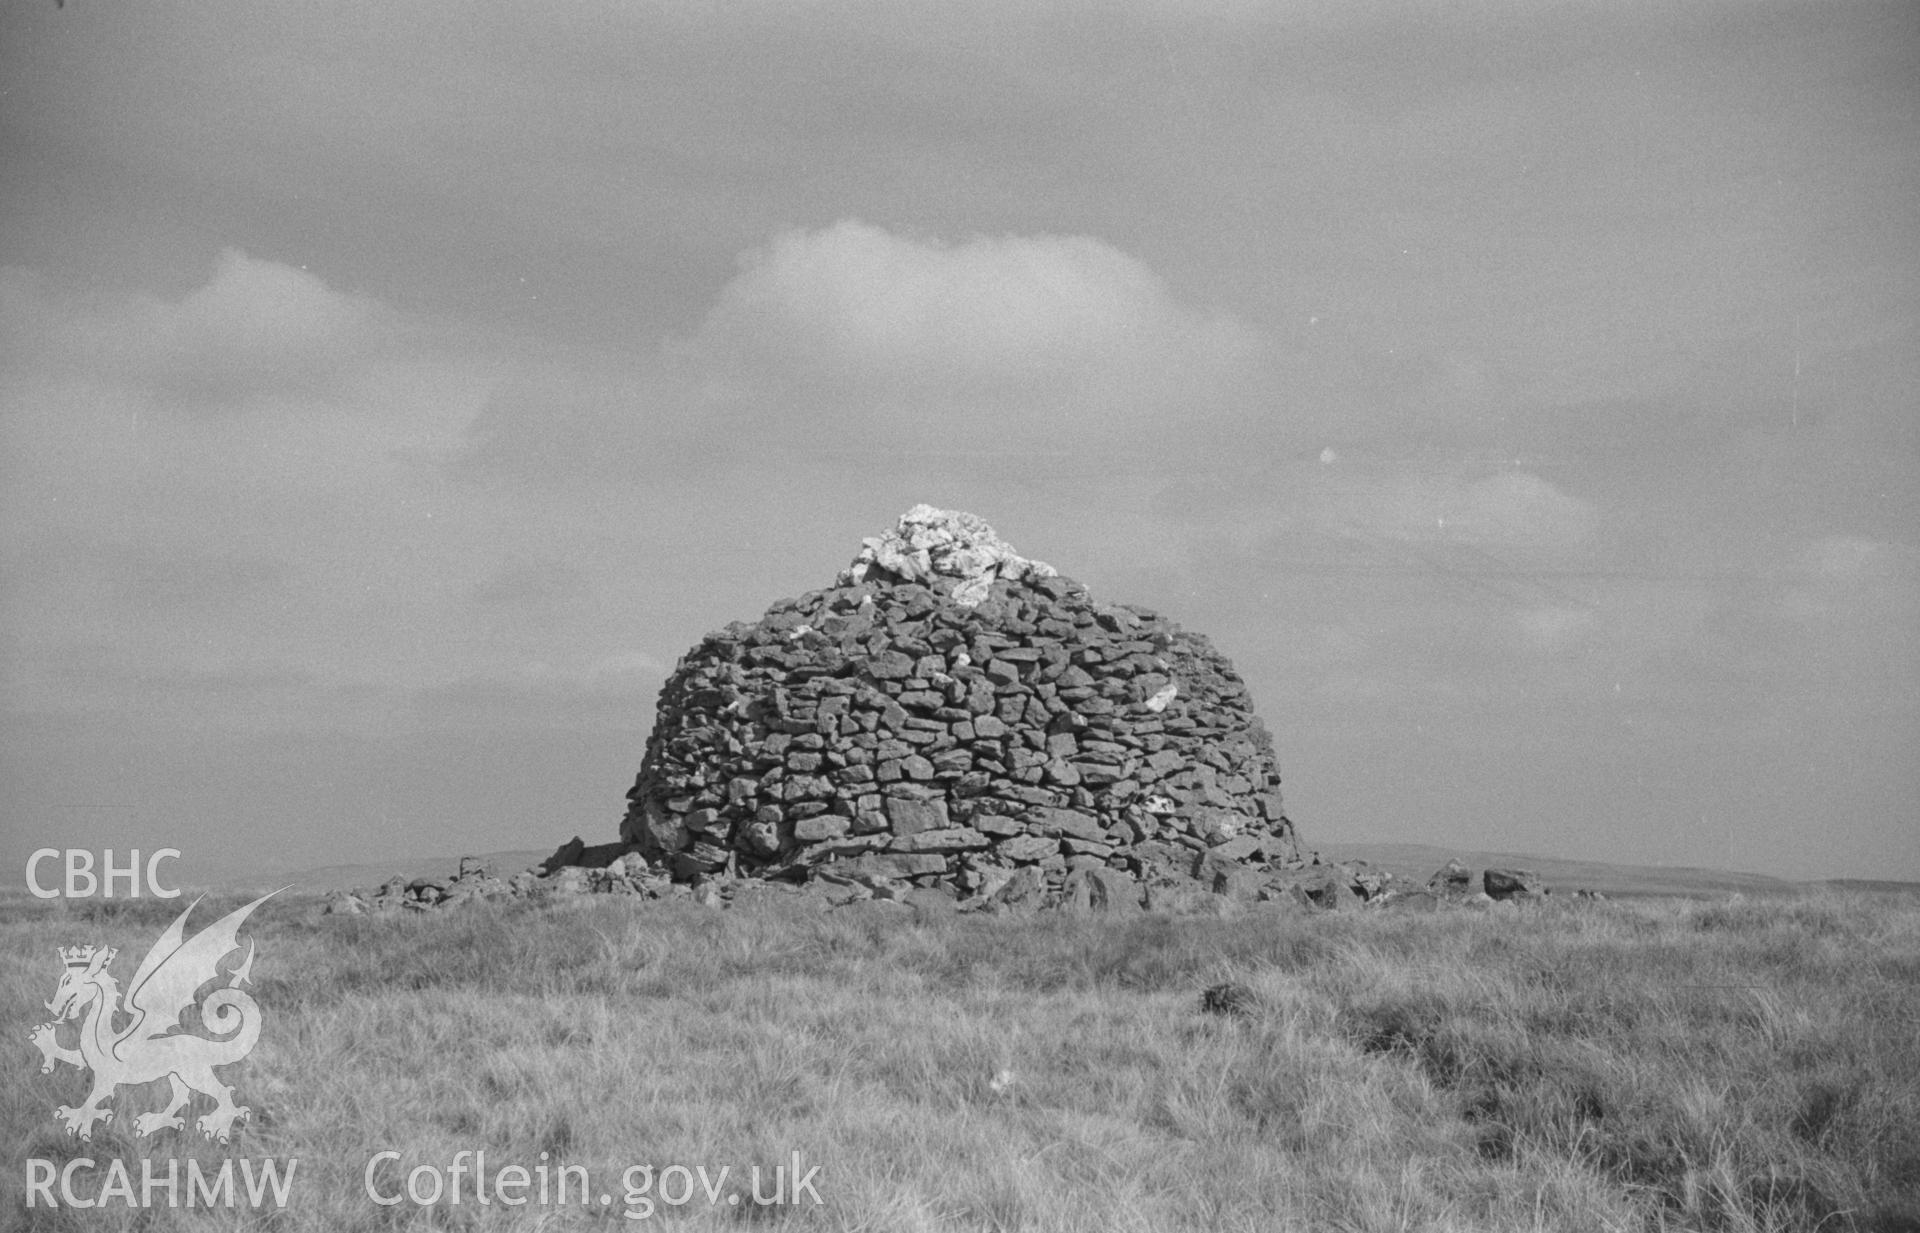 Digital copy of a black and white negative showing view of eastern cairn at summit of Drygarn Fawr, in the Cambrian Mountains. Photographed by Arthur O. Chater in September 1964.